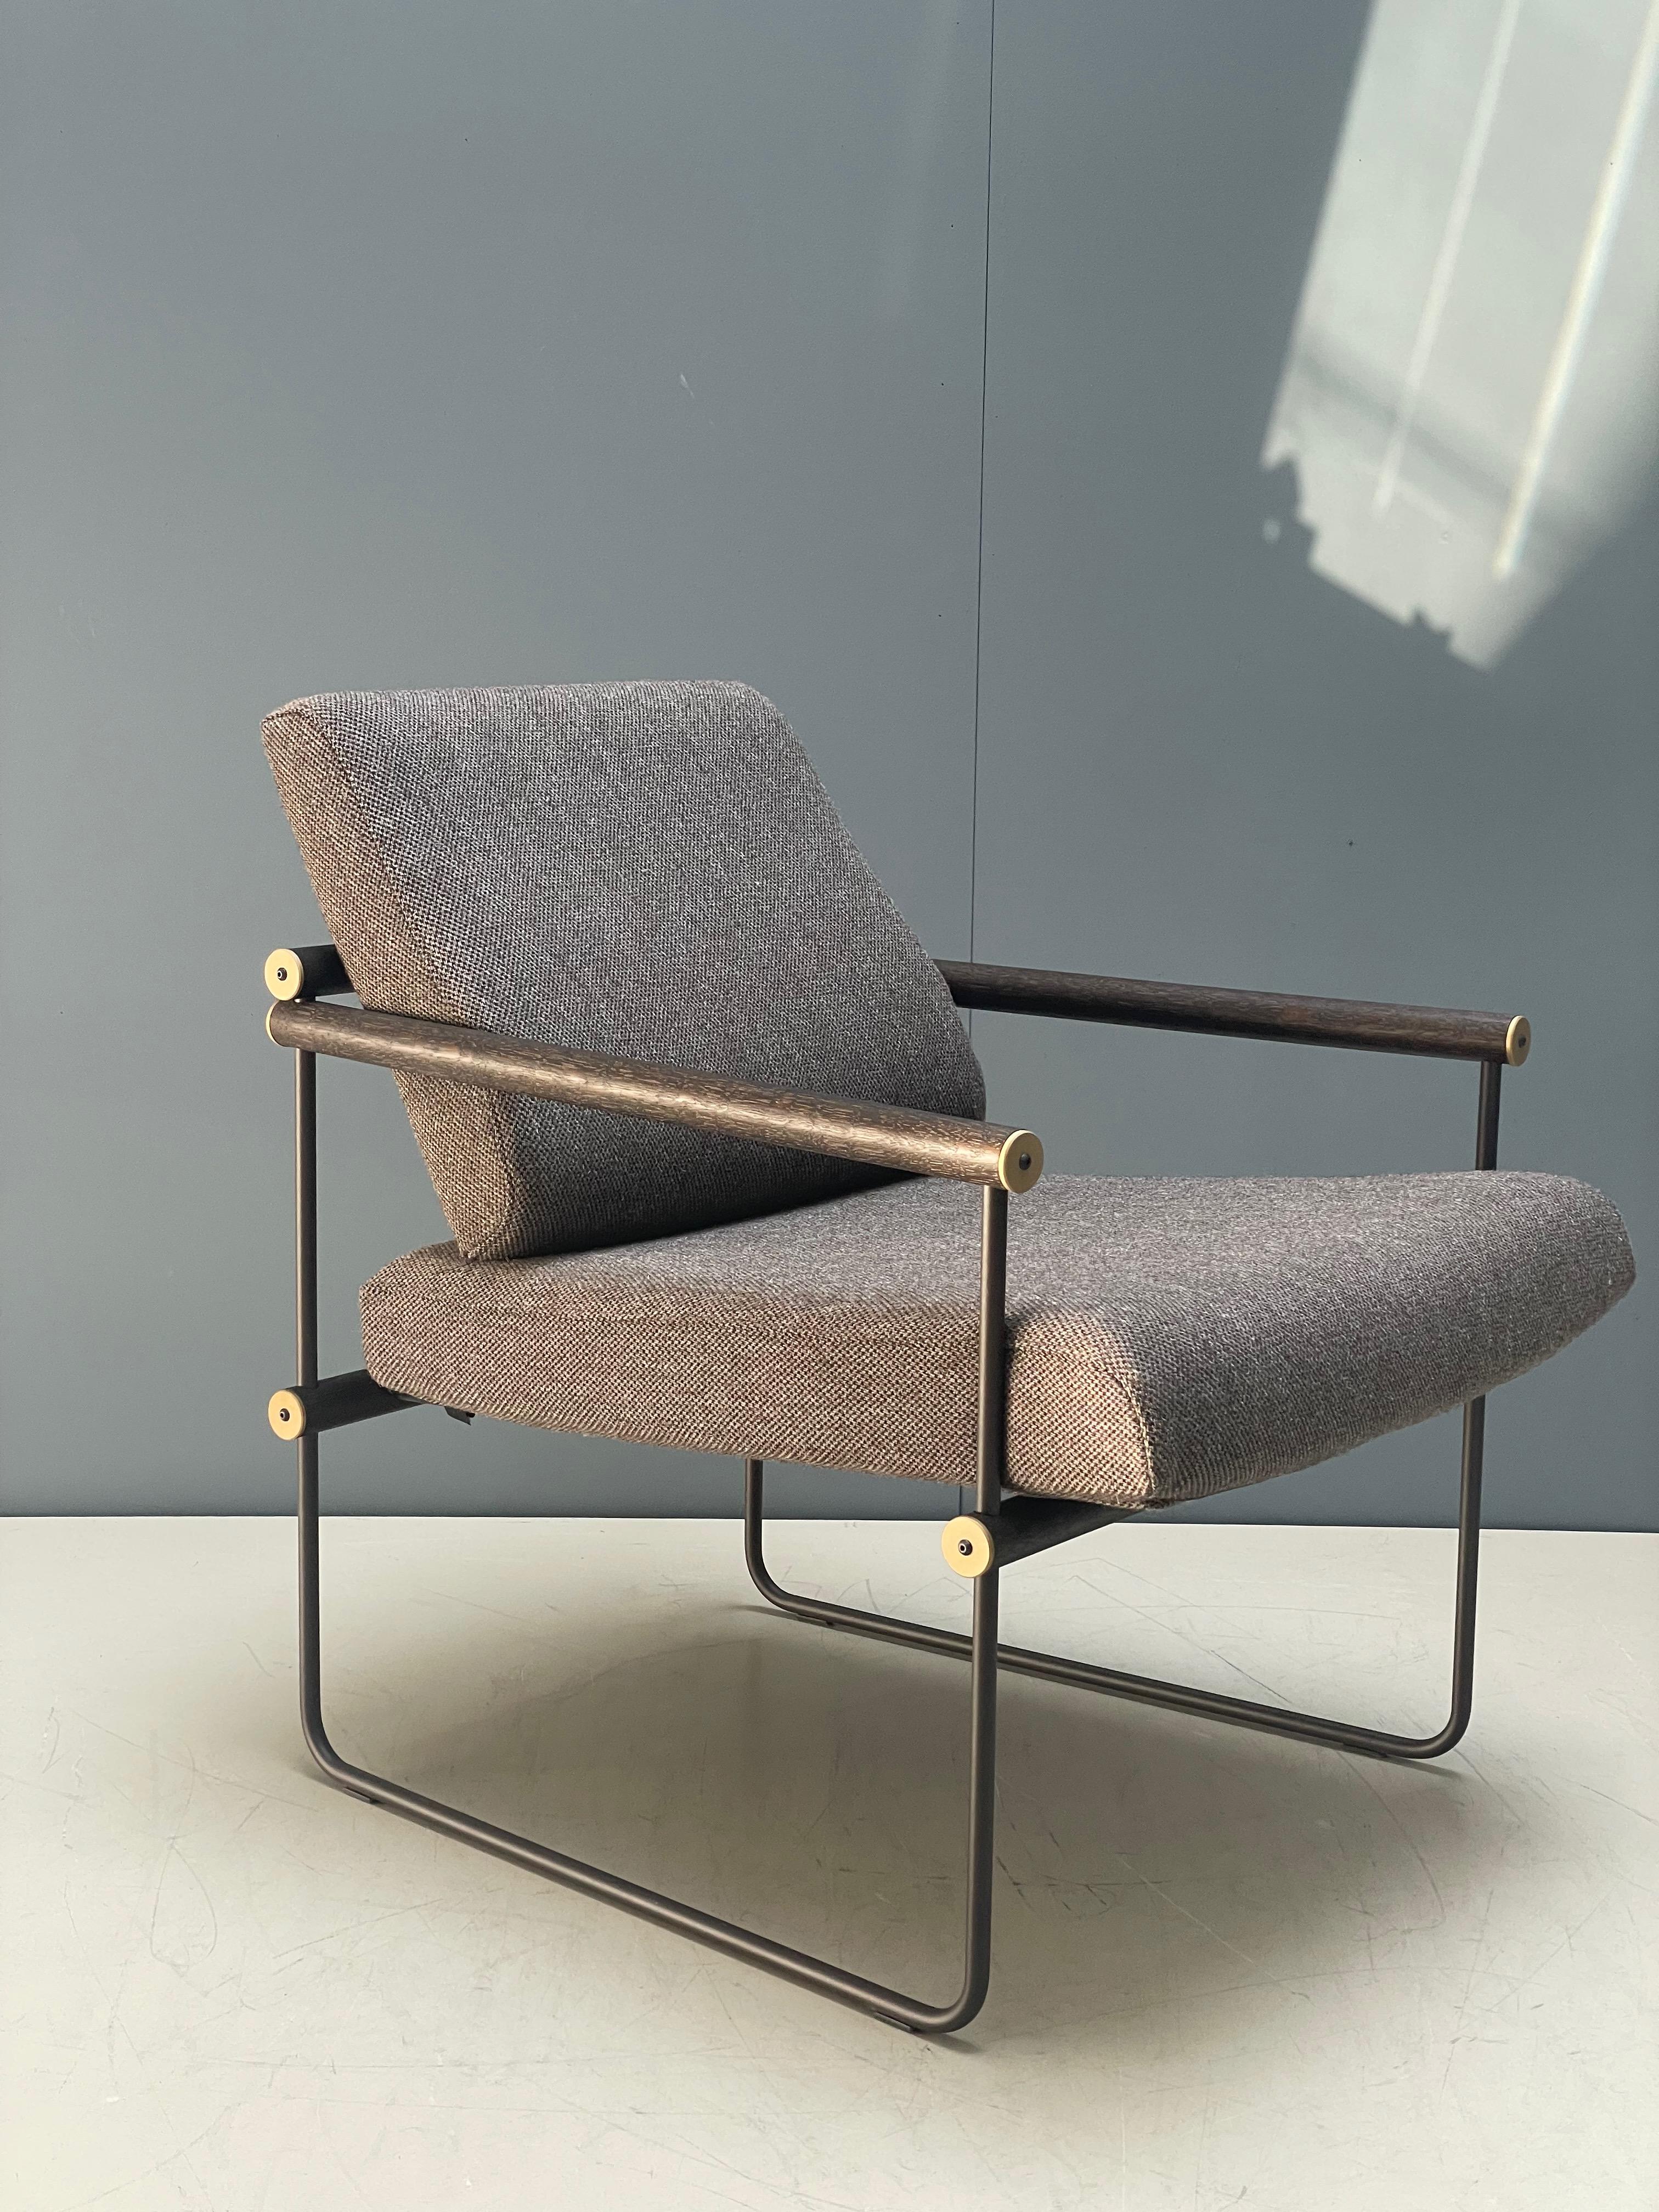 This Mid-Century Modern 'Audrey' S12 is a comfortable light-weight armchair designed by Peter Ghyczy in 2017 and hand-crafted in the Ghyczy atelier in the South of the Netherlands. Since coming on the market in 2017 the 'Audrey' S12 has remained a